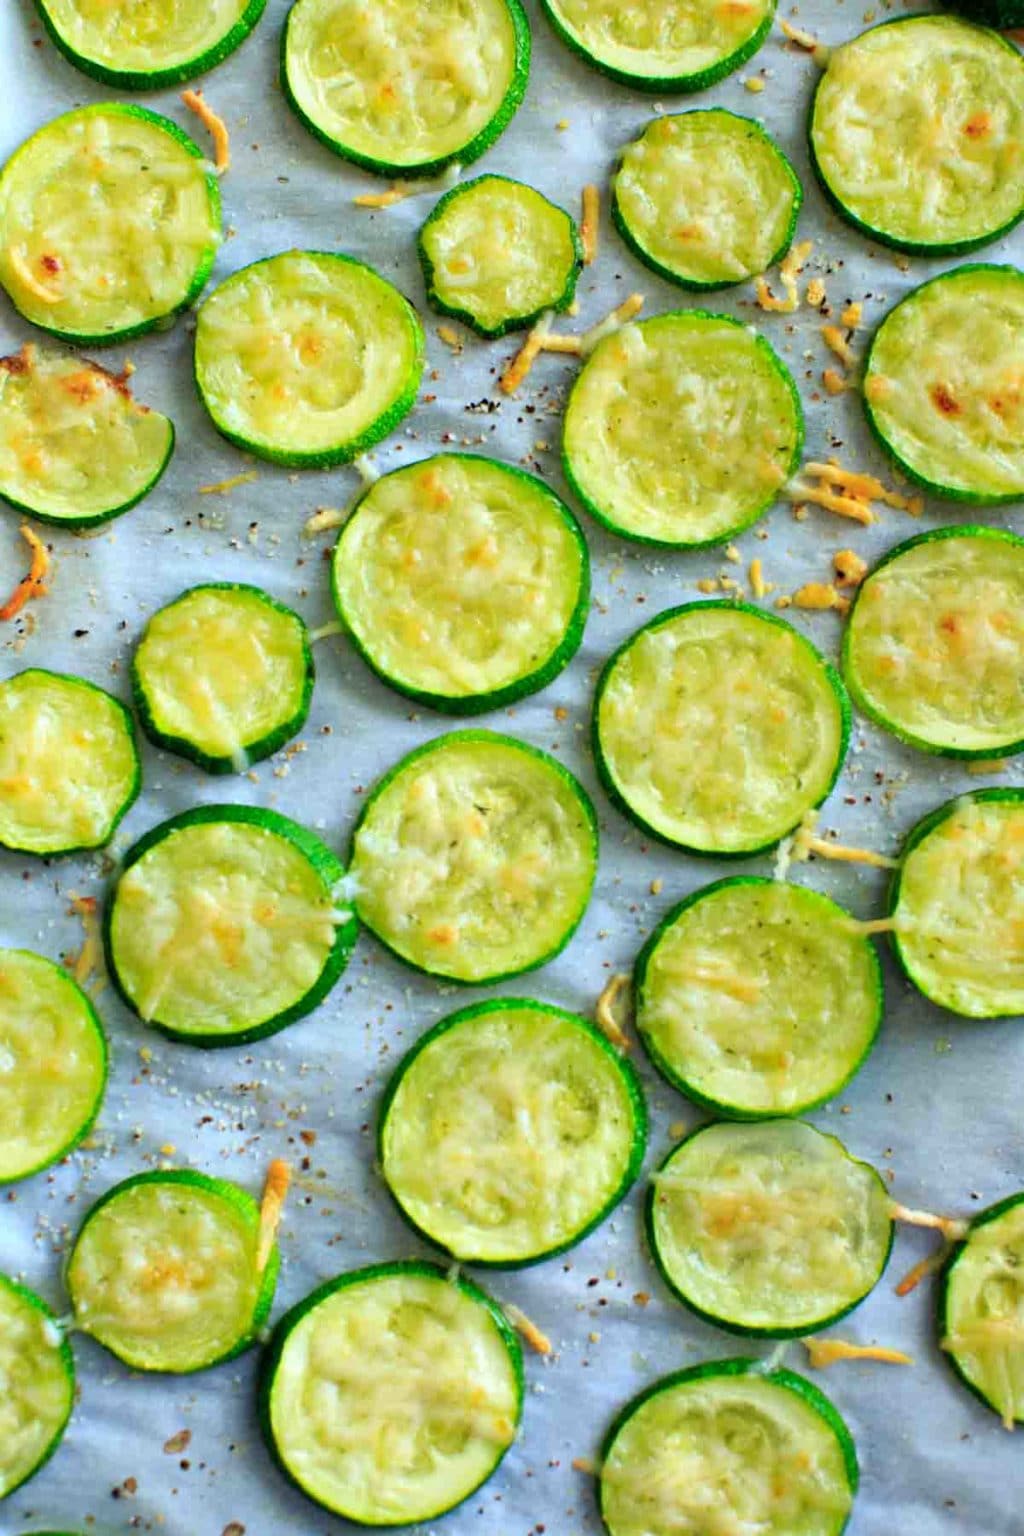 Baked Parmesan Zucchini Chips - a healthy and flavorful snack that is a great way to get more veggies on your plate.